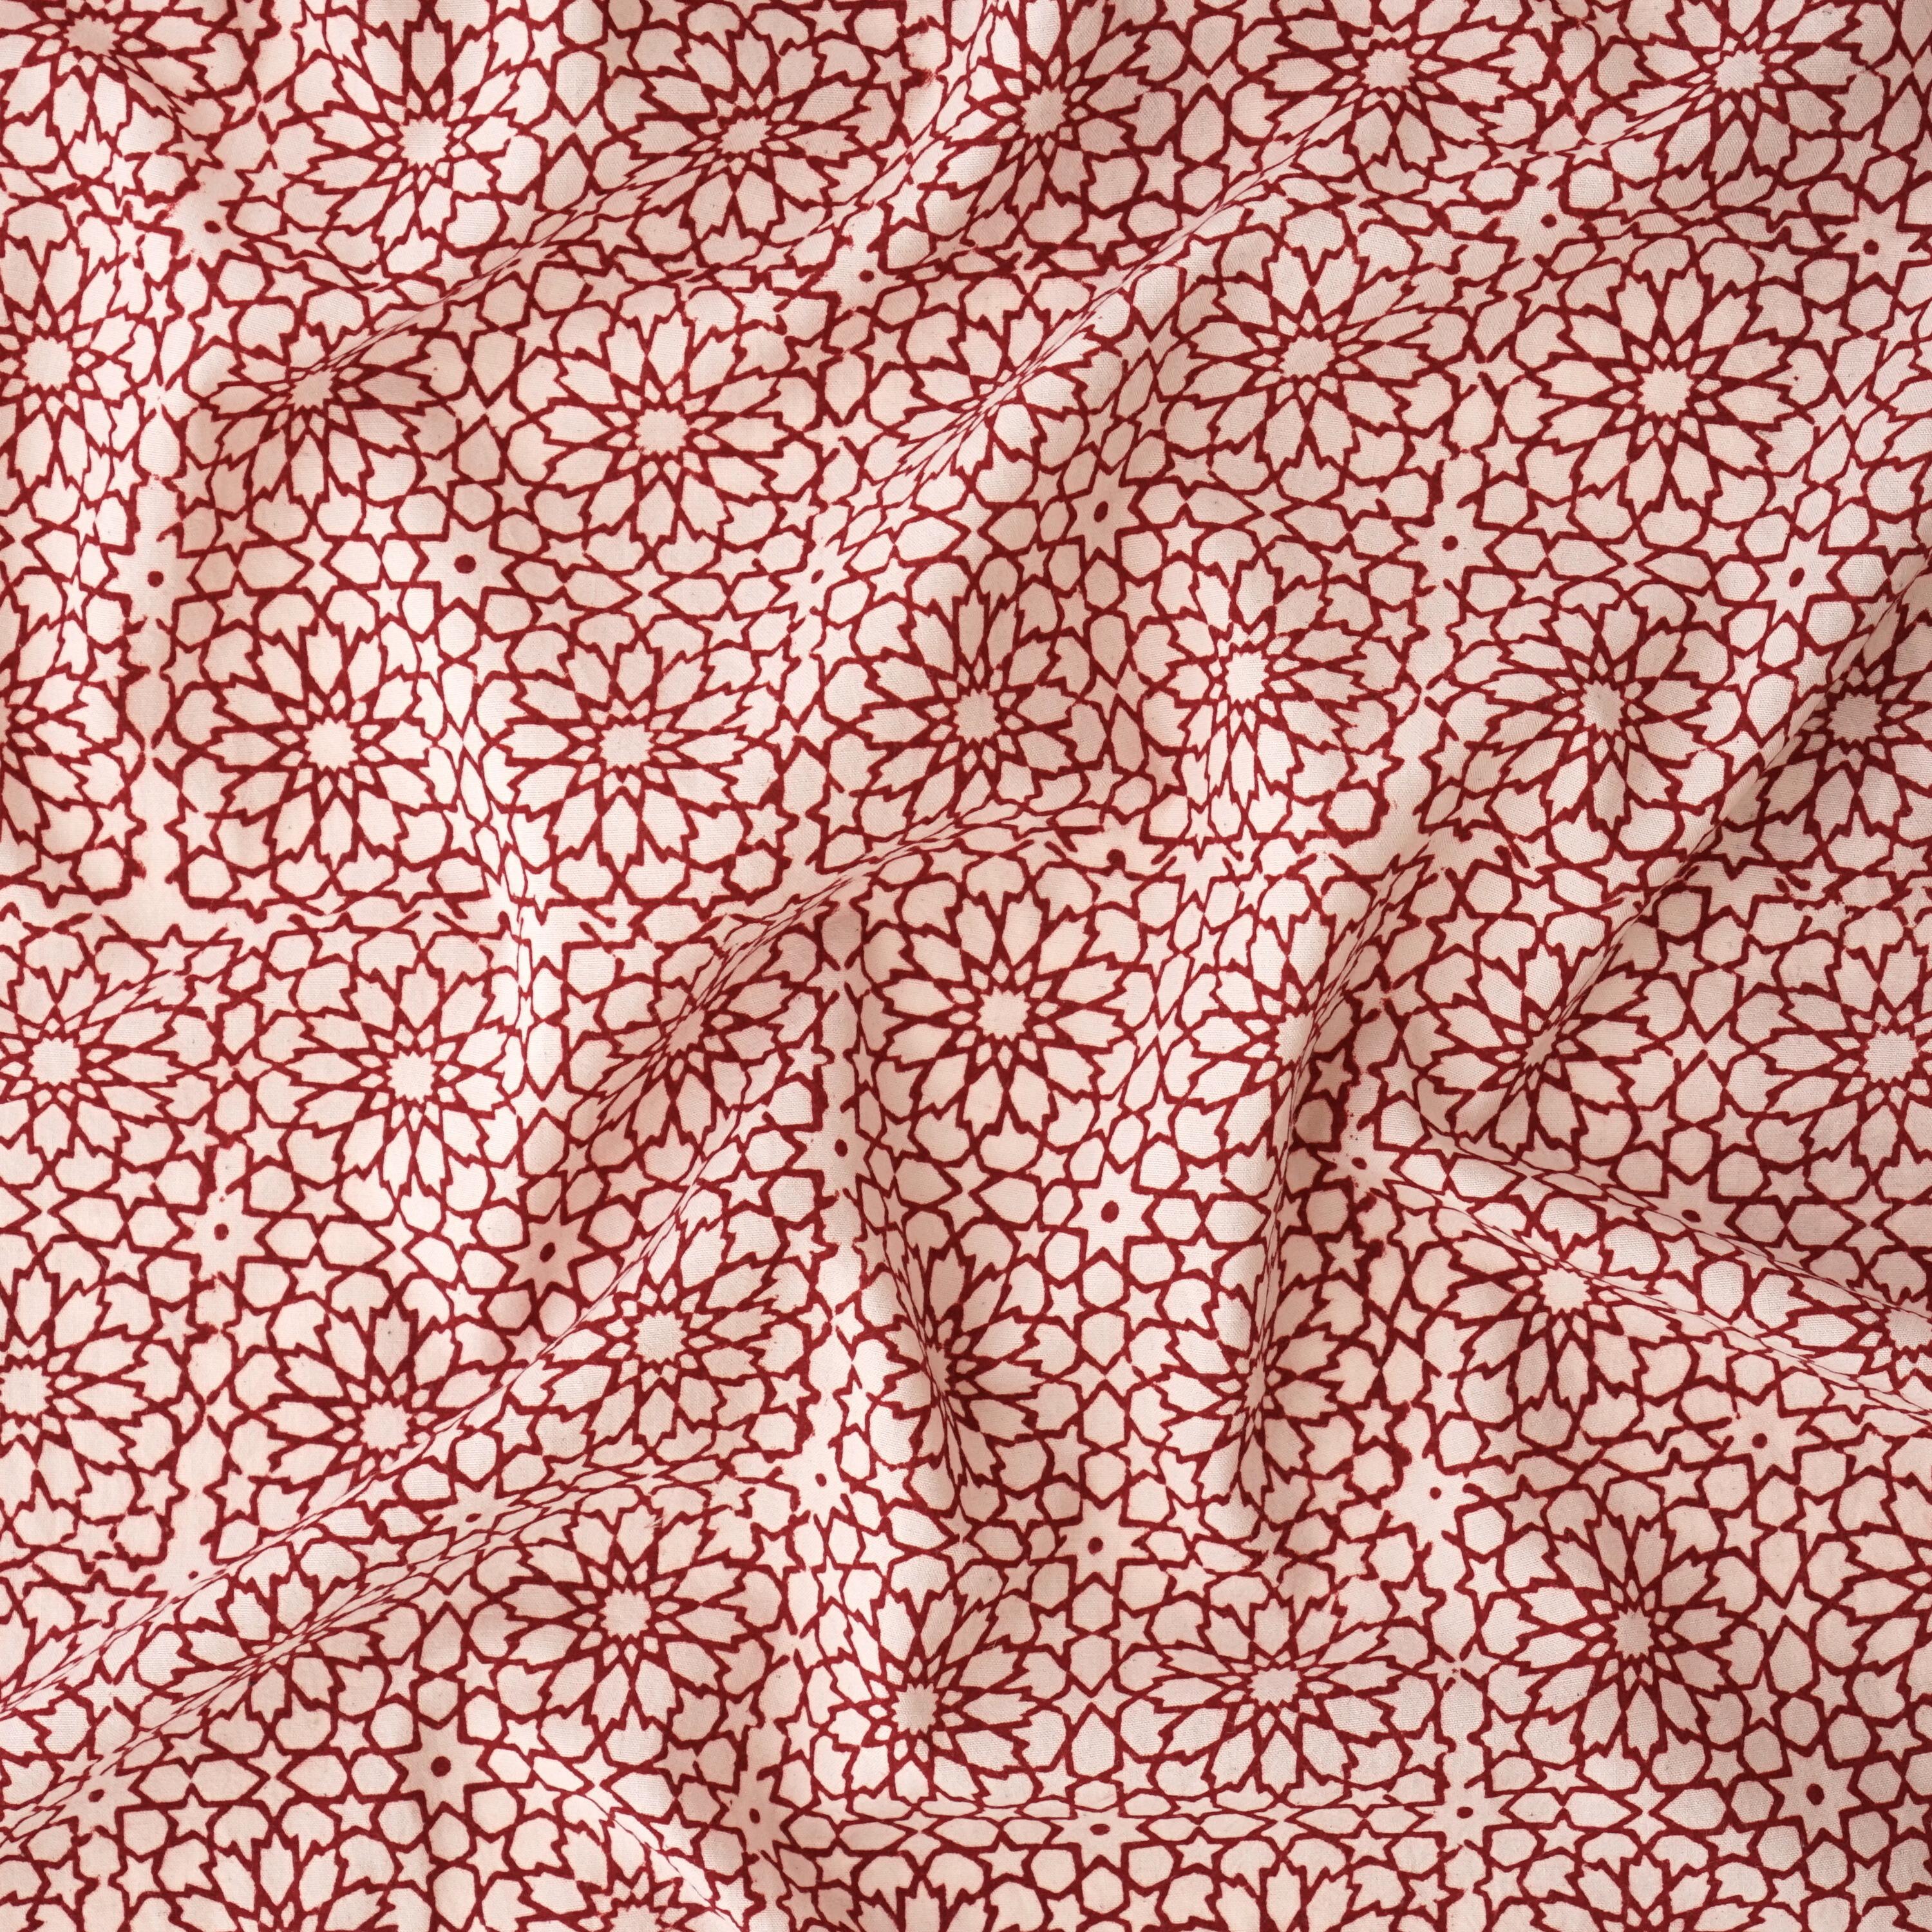 100% Block-Printed Cotton Fabric From India - Floral Sublimity Design - Alizarin Red Dye - Contrast